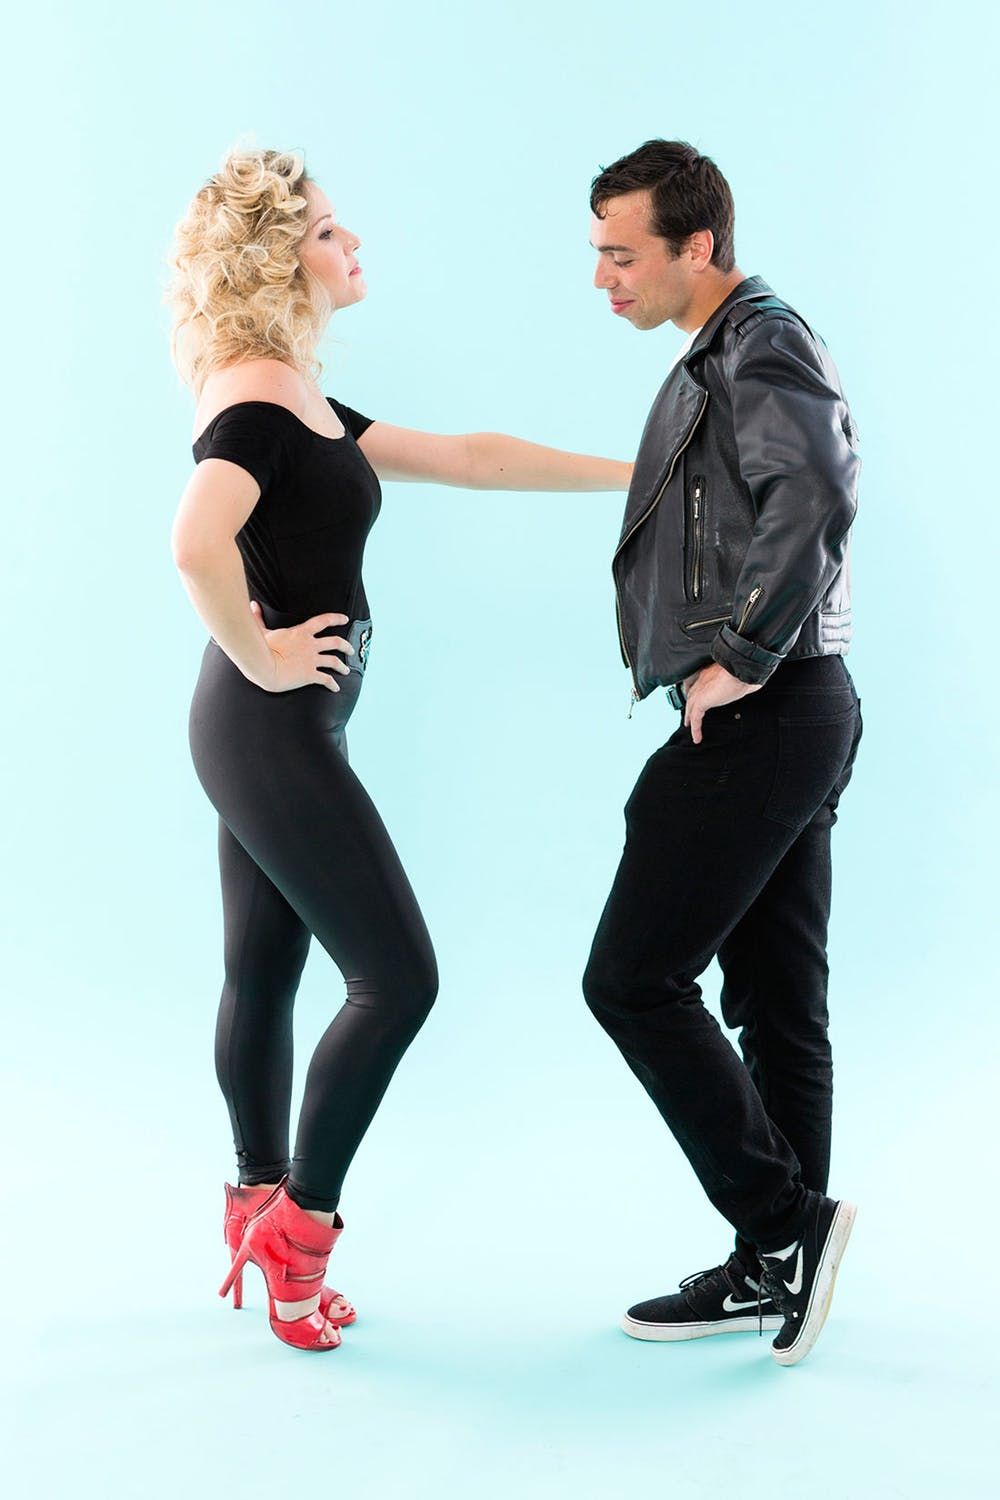 29 Best Grease Costume Ideas - DIY Grease Costumes